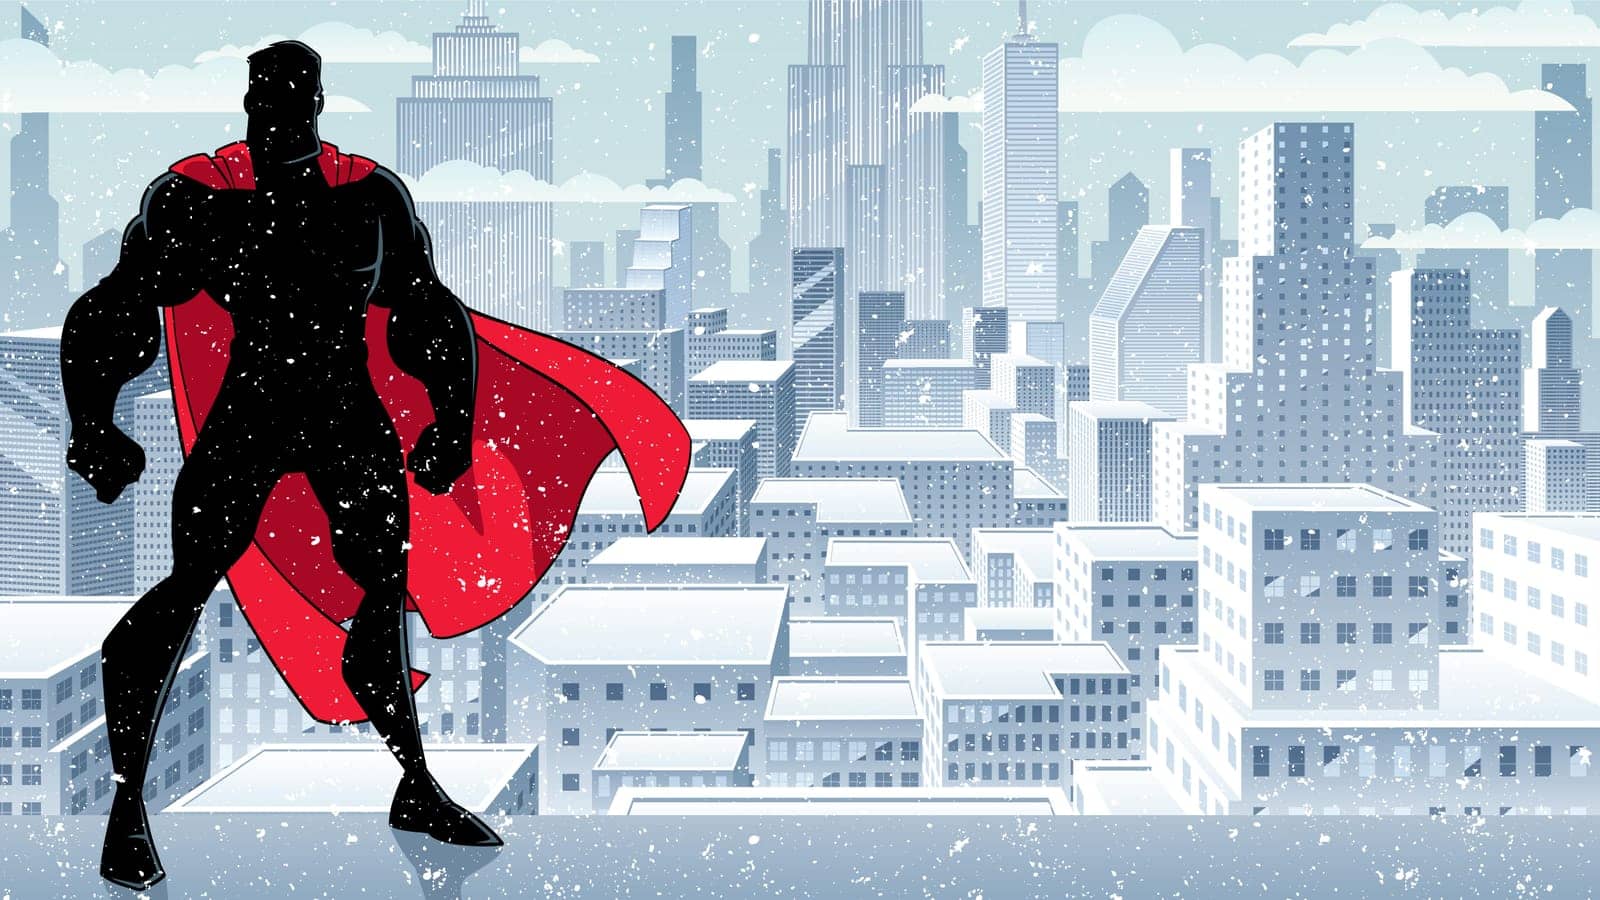 Silhouette of superhero standing tall on winter city background with copy space.